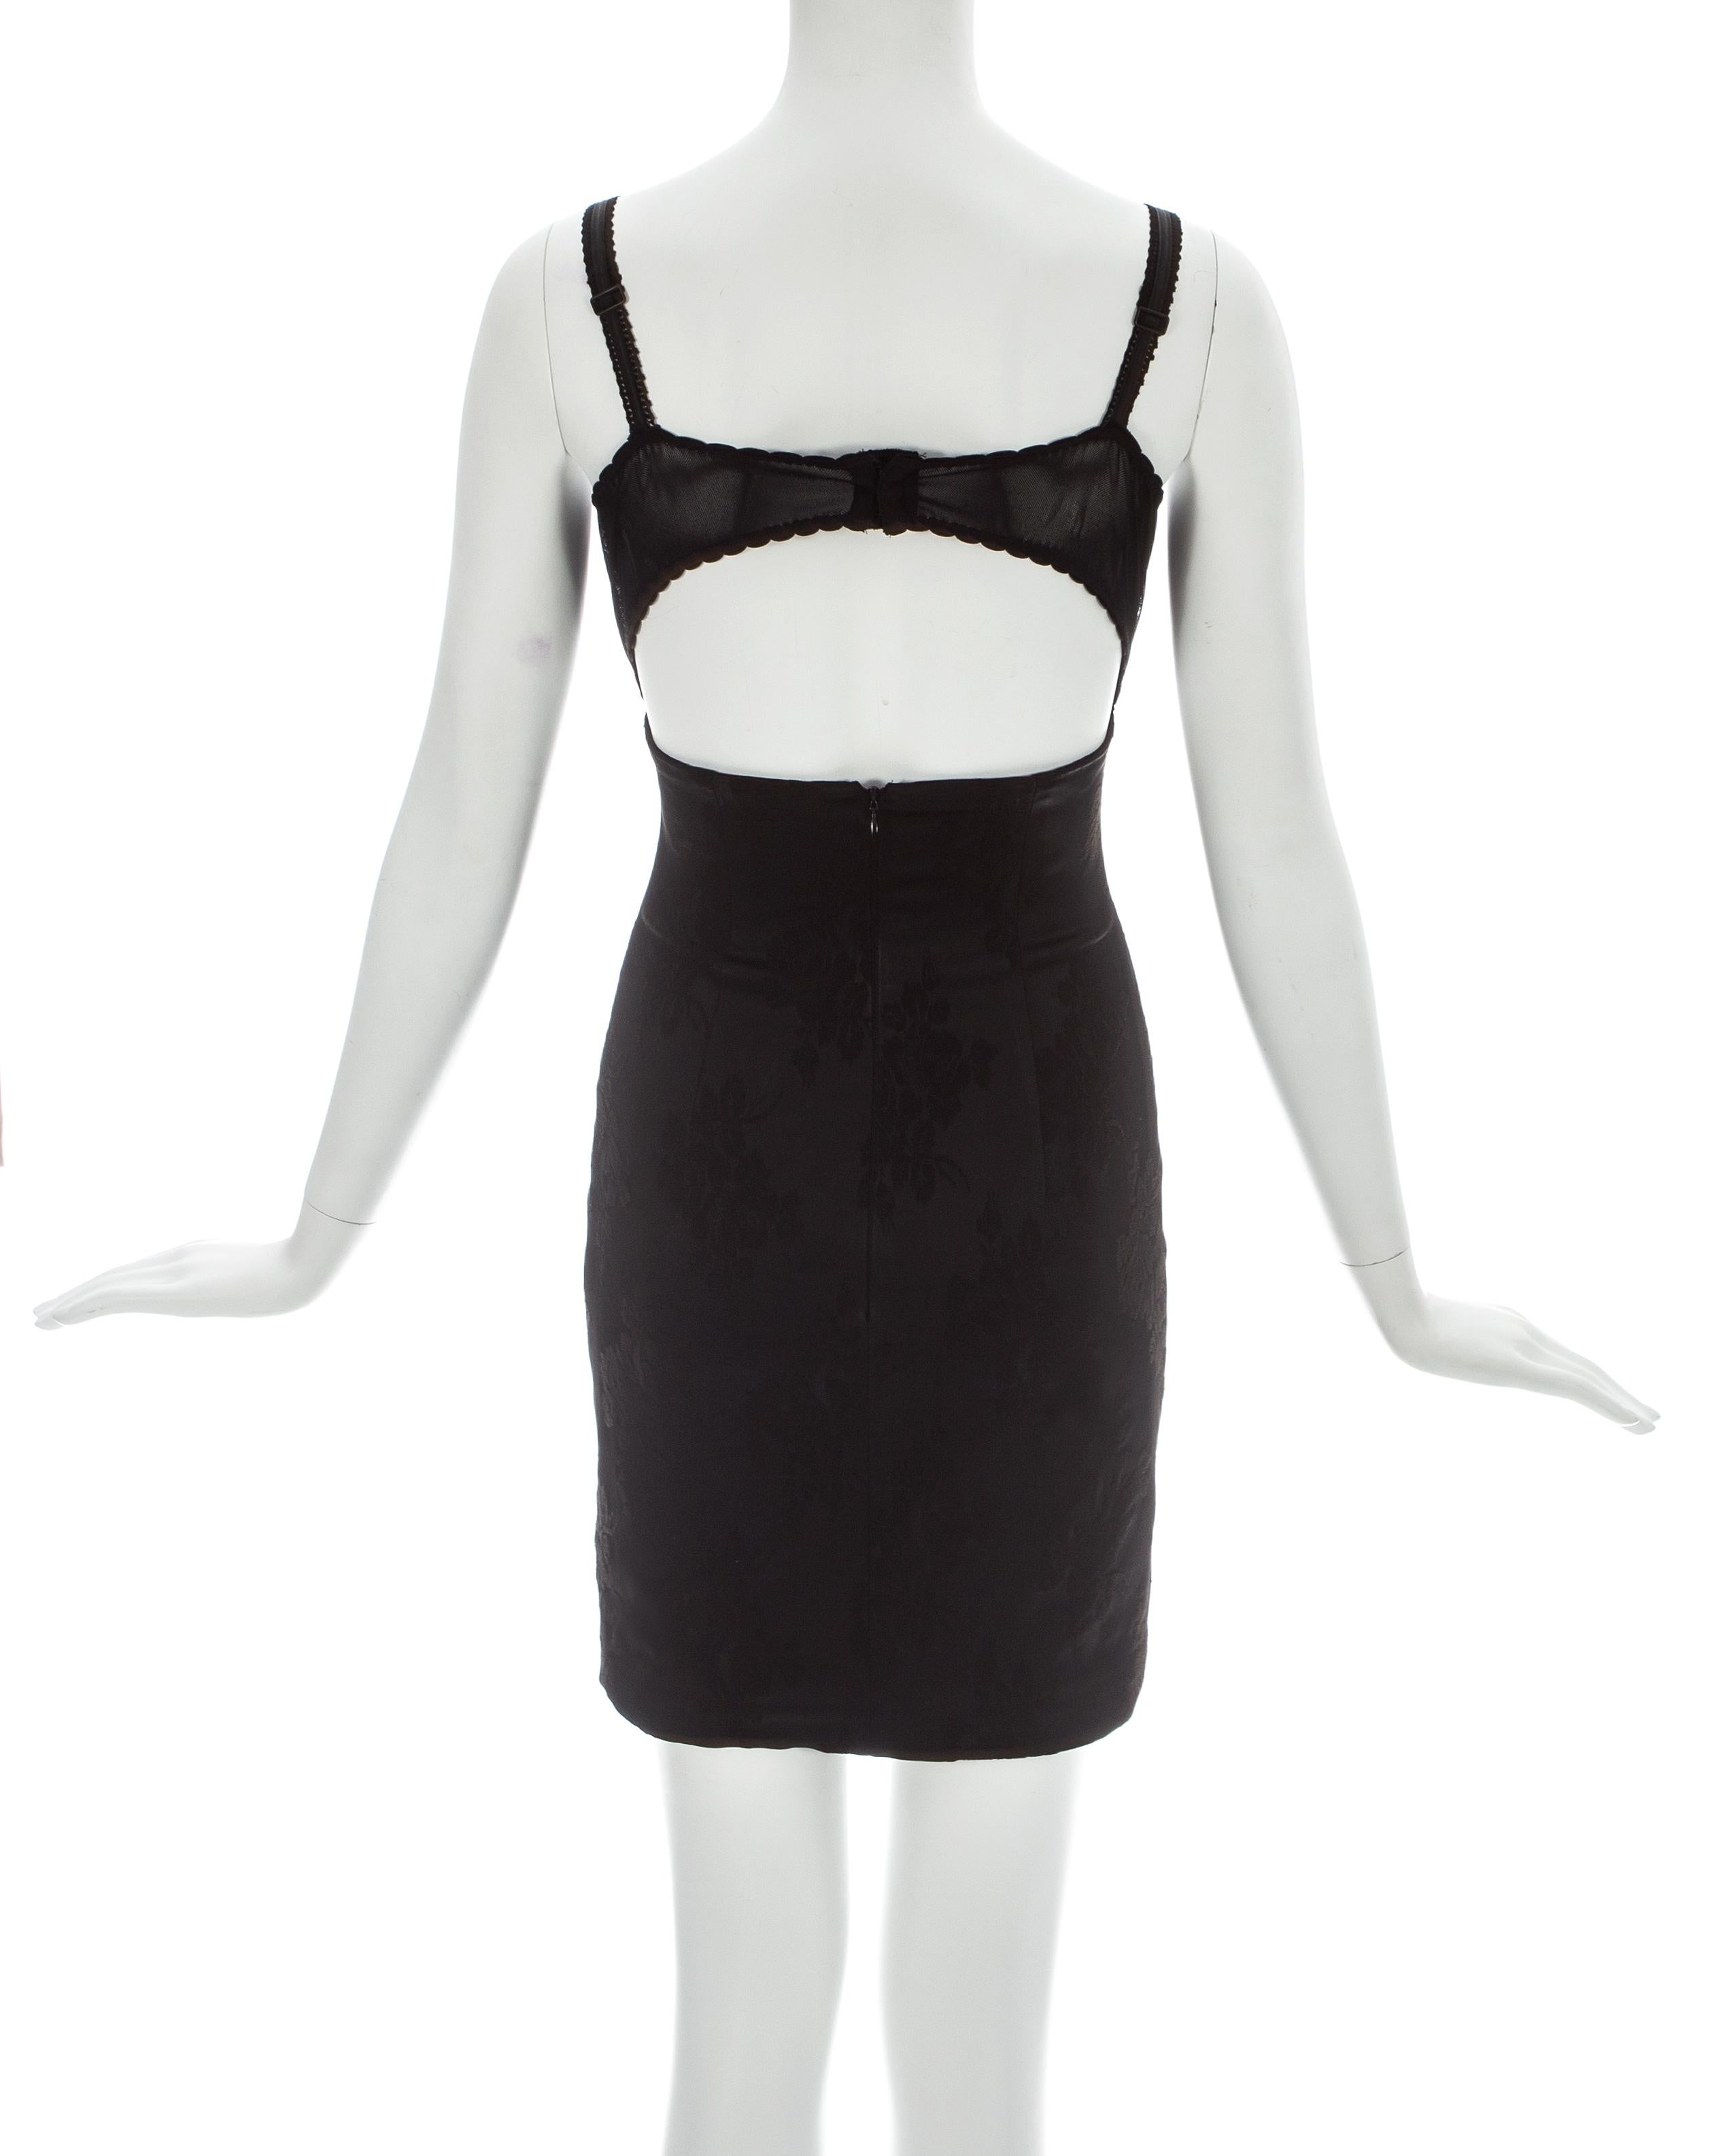 Dolce And Gabbana Black Brocade Mini Dress With Exposed Bra A W 1997 At 1stdibs Exposed Bra